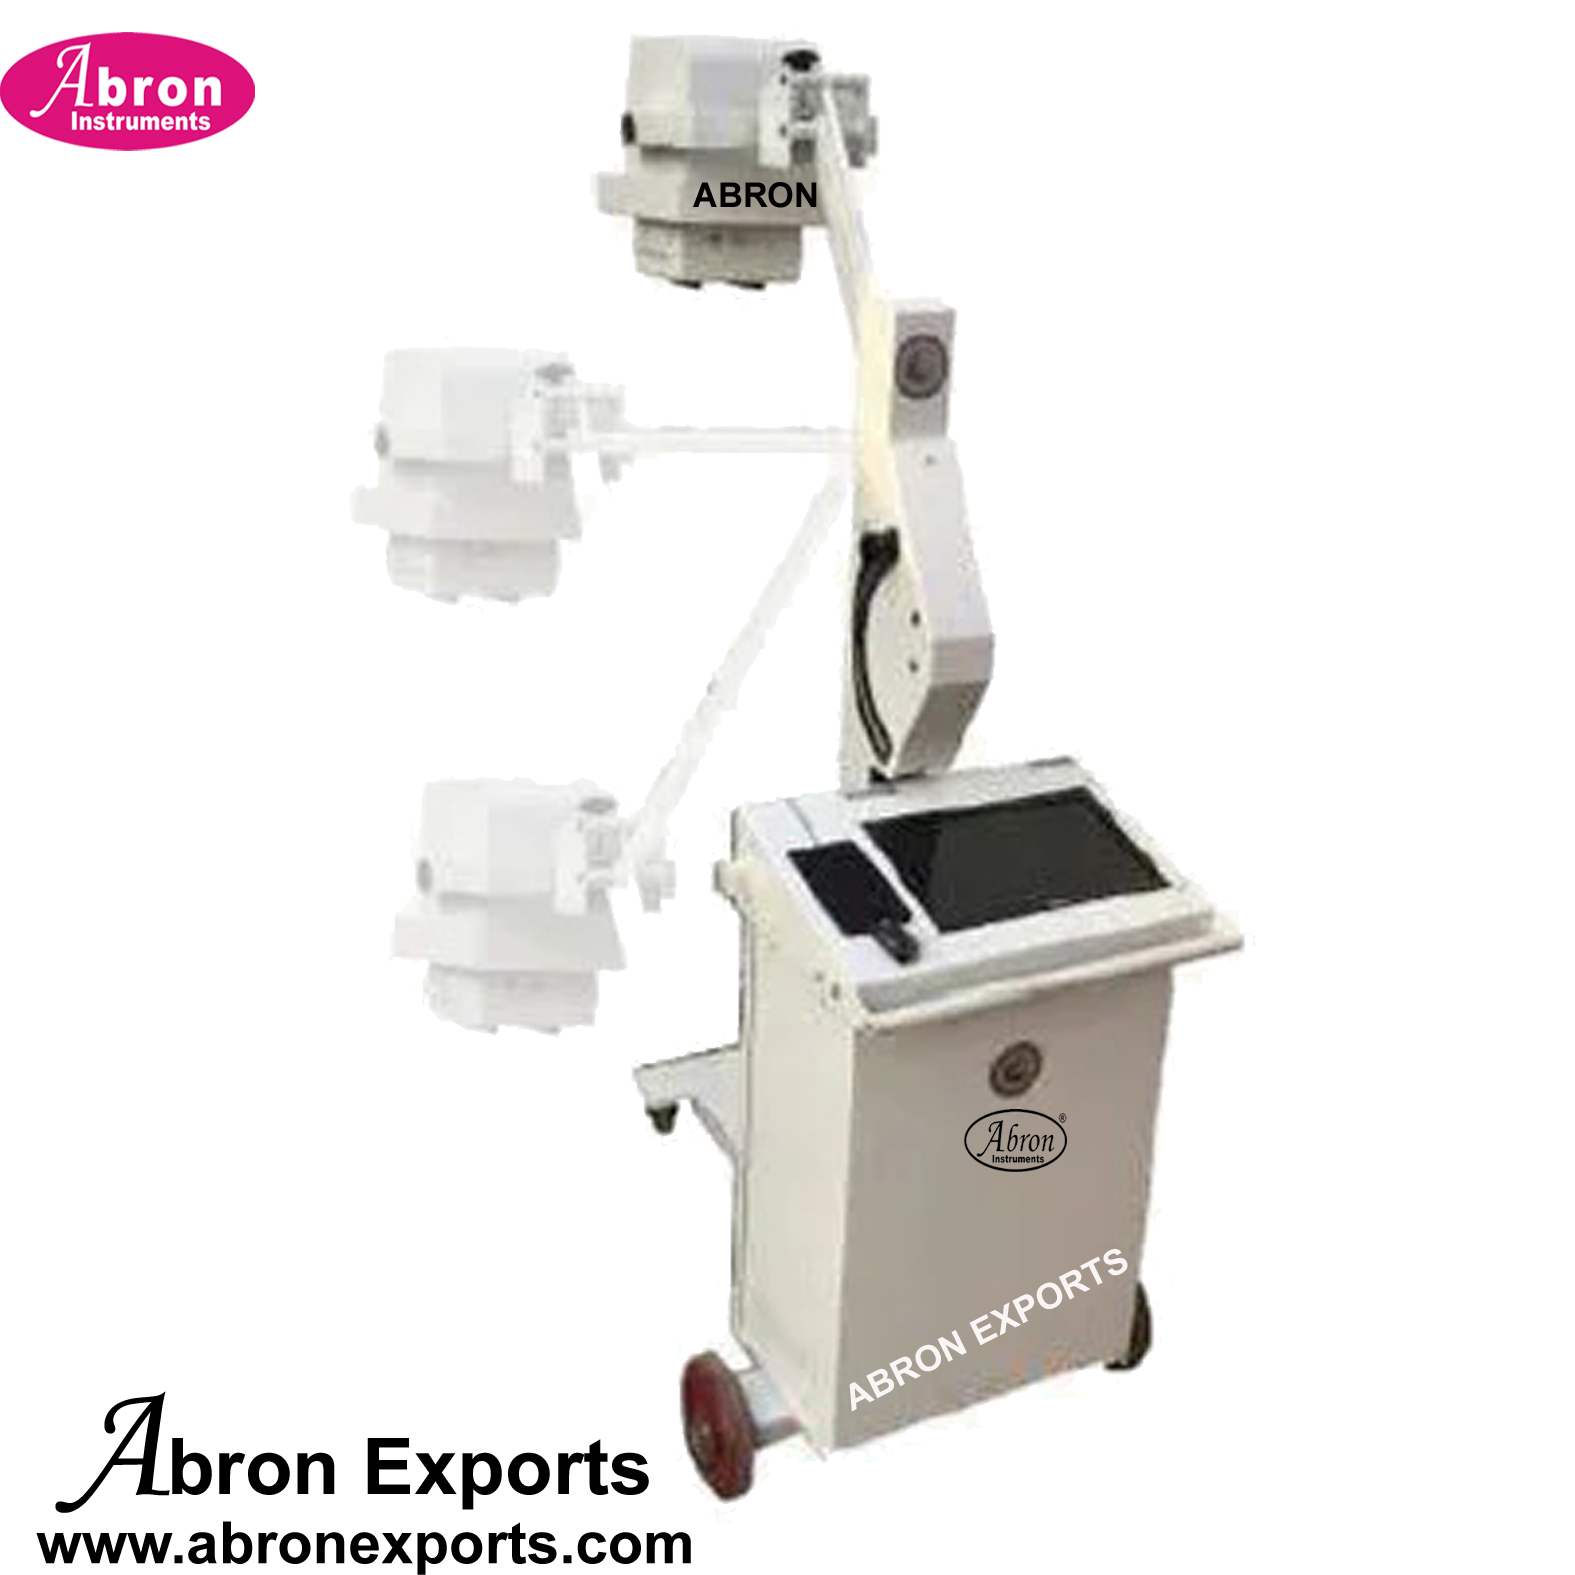 Ortho x-ray machine Mobile 80mA Adjustable Head Portable with controller and stand setup Nursing Home Hospital Abron ABM-2782M80A 